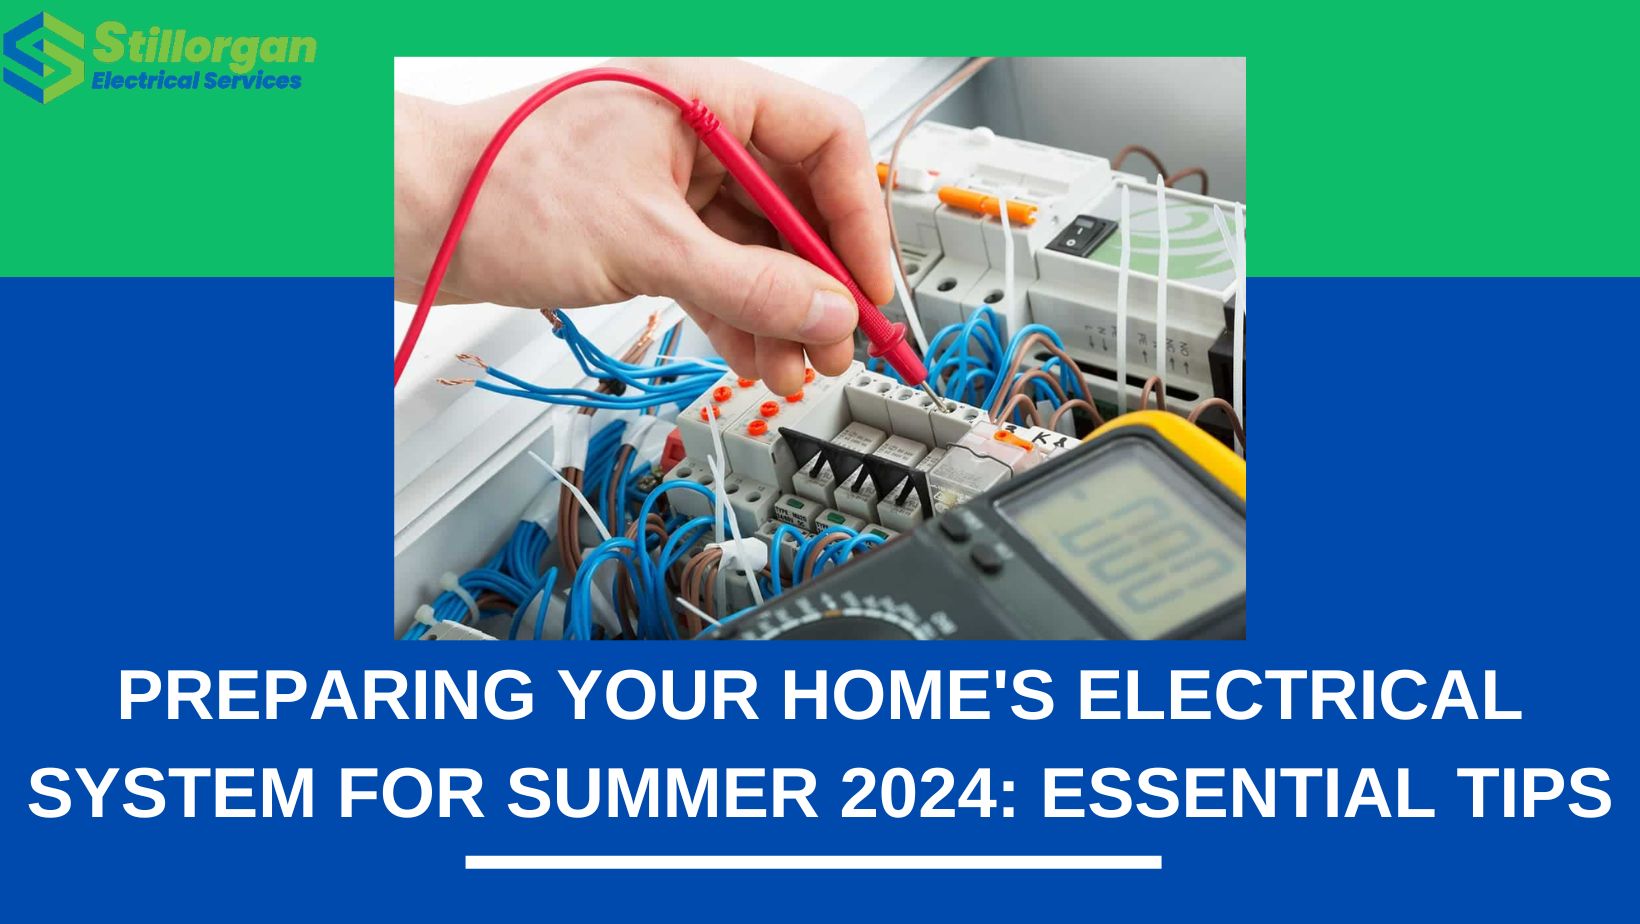 Preparing Your Home's Electrical System for Summer 2024: Essential Tips